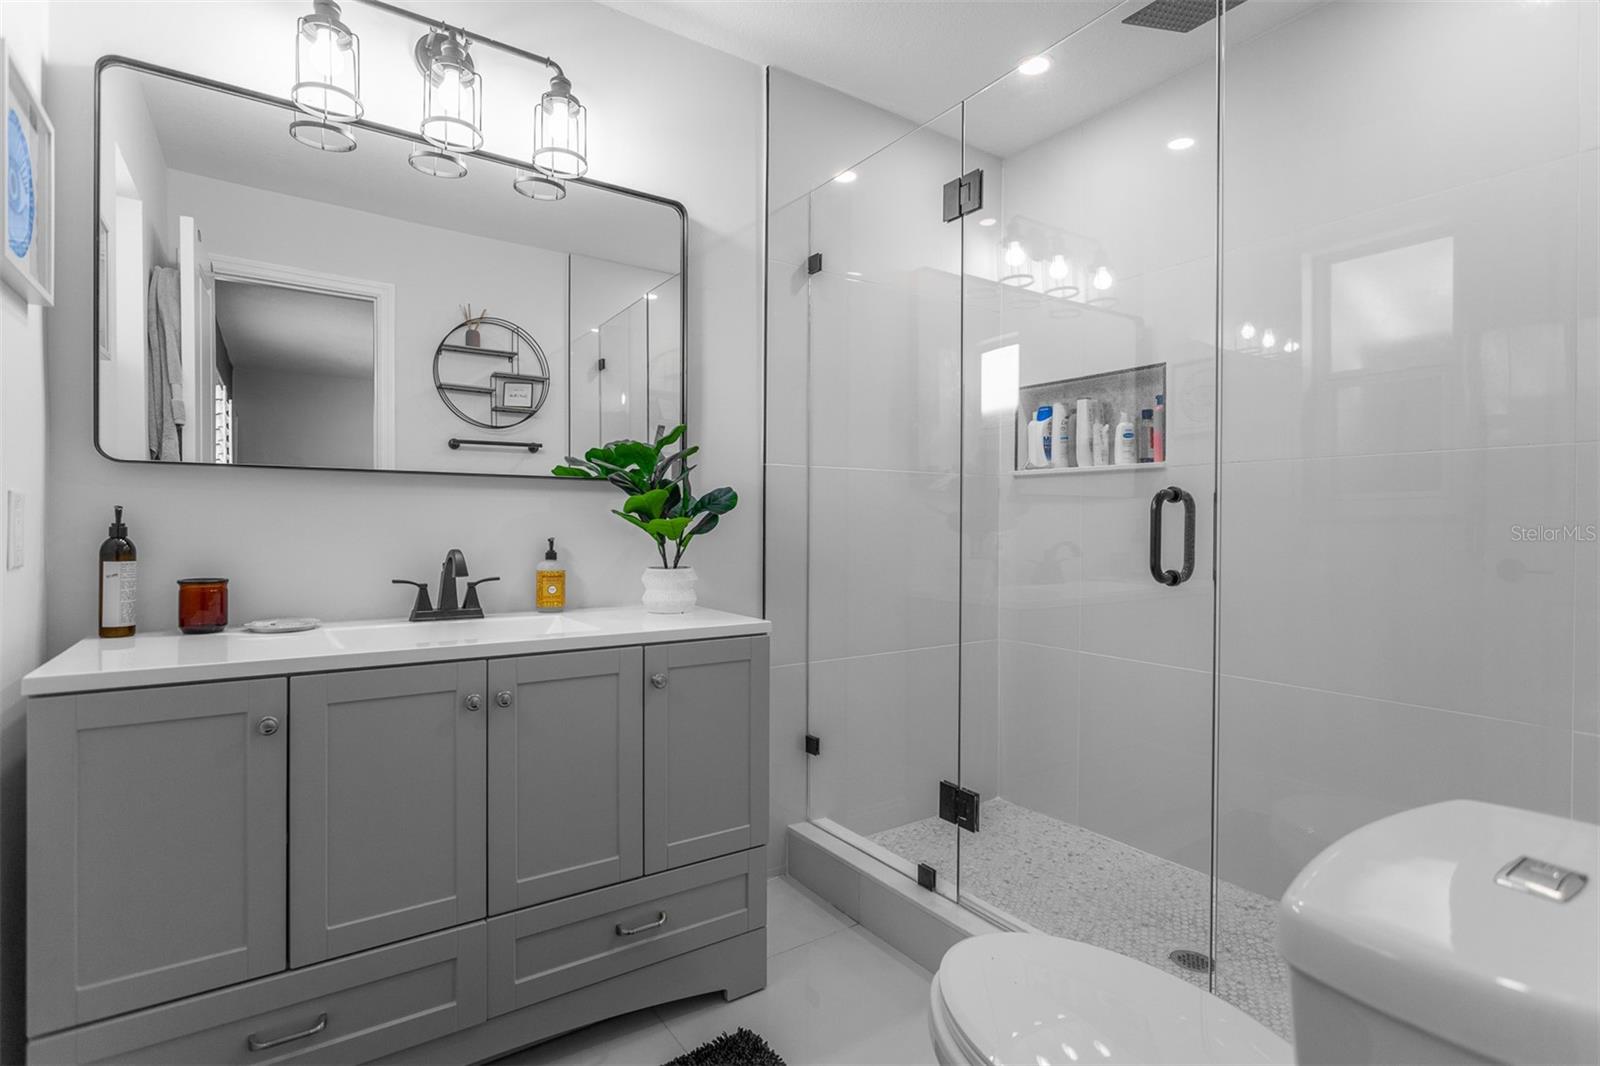 Masterfully renovated master bathroom with seamless glass entry